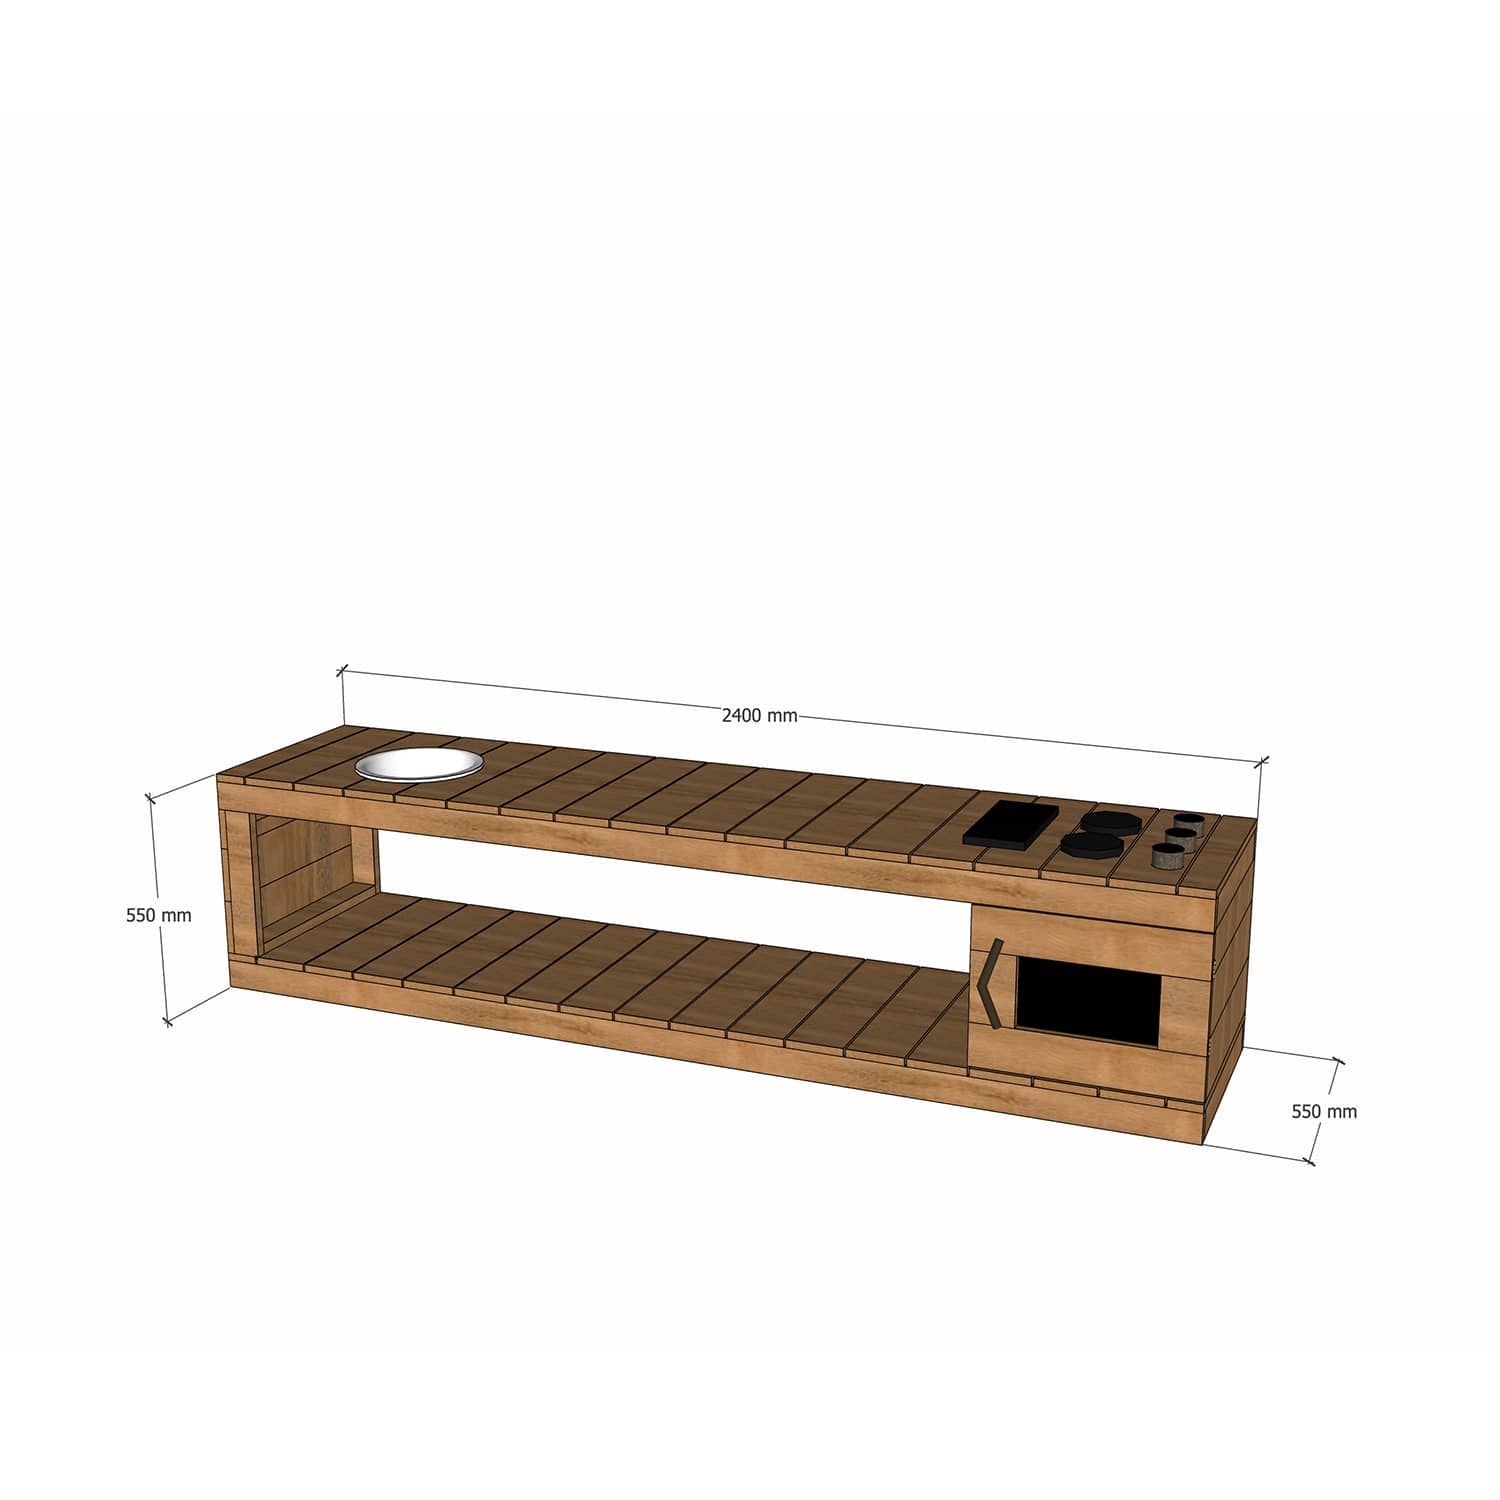 Thermory mud kitchen with oven 2400mm wide and 550mm bench height